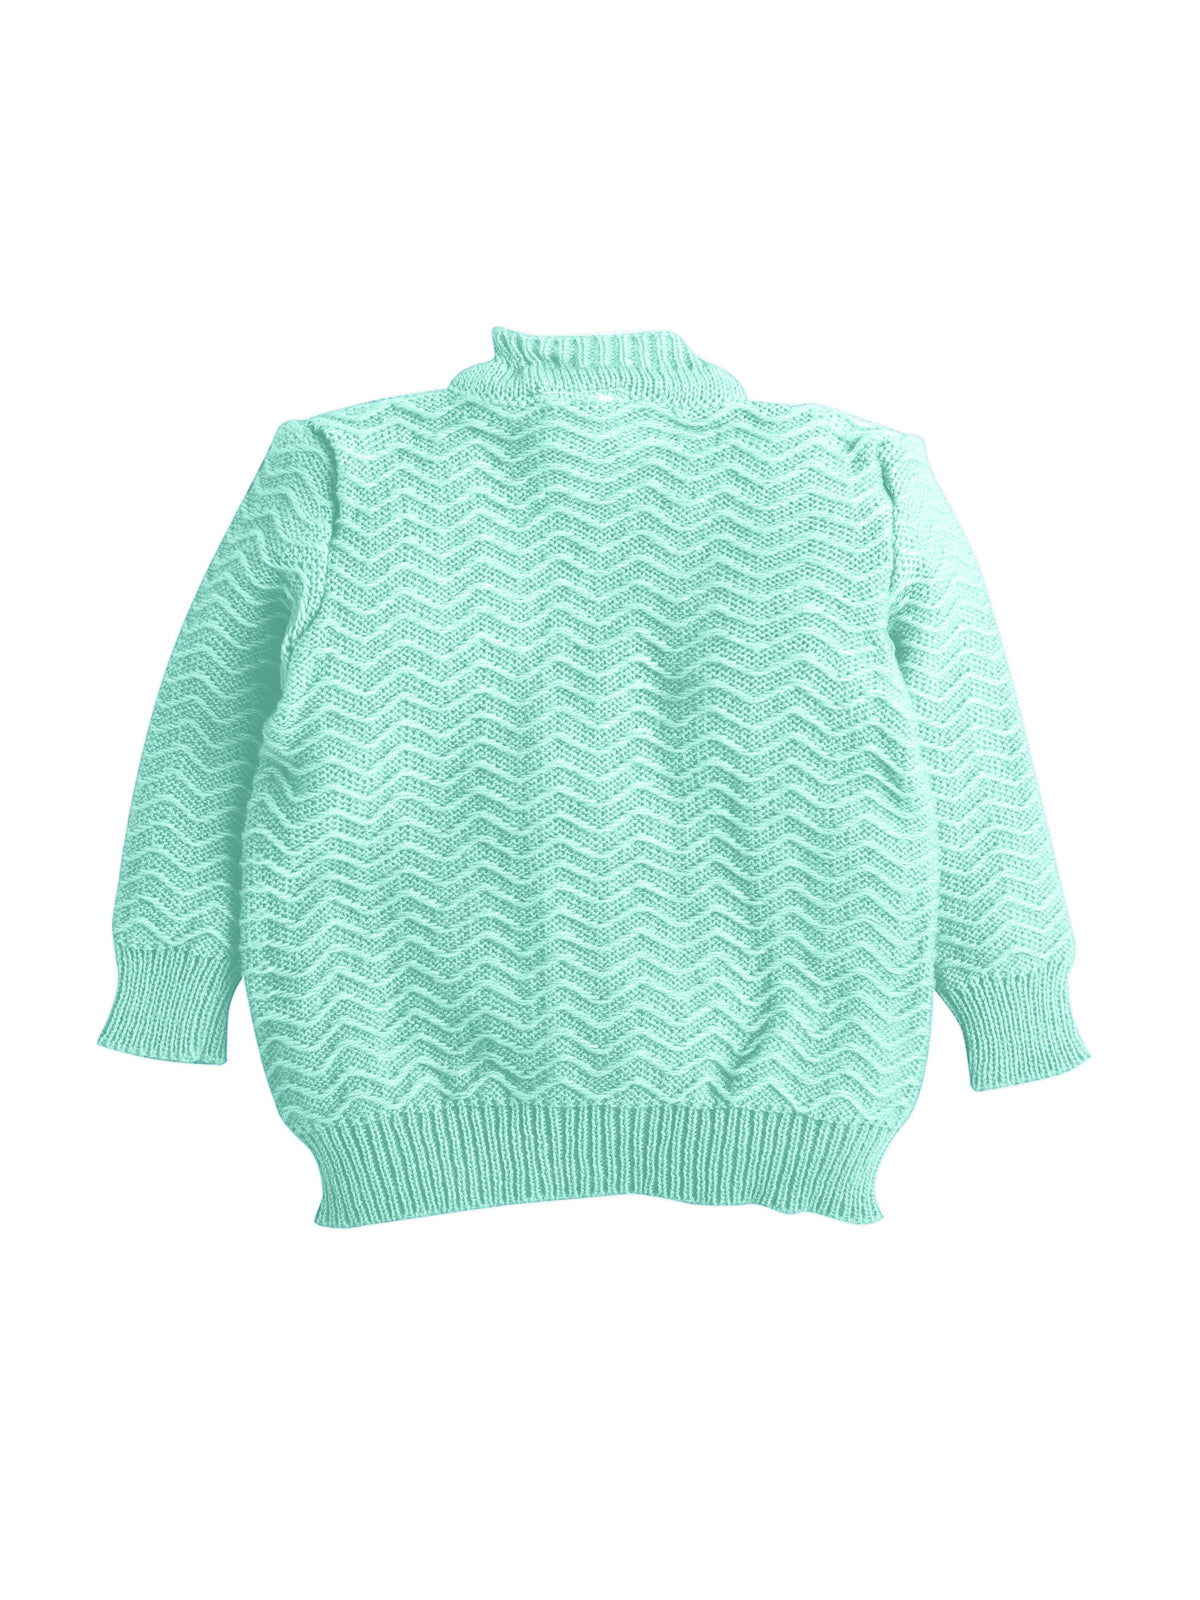 Full Sleeve Front Open Zig-zag pattern Green Color Sweater with matching Caps and Socks for Baby